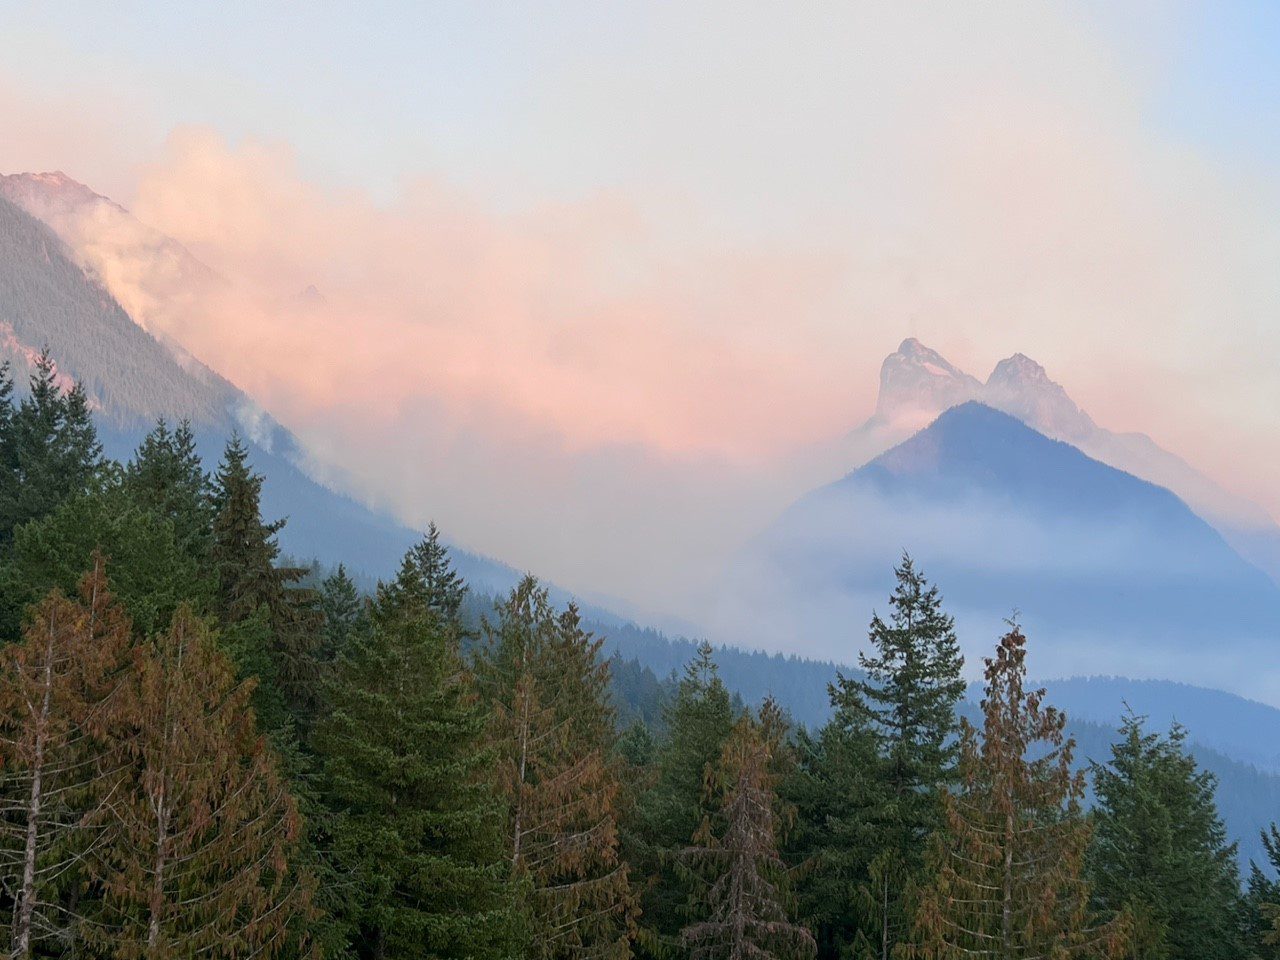 Wildfire smoke in a mountainous, forested area.